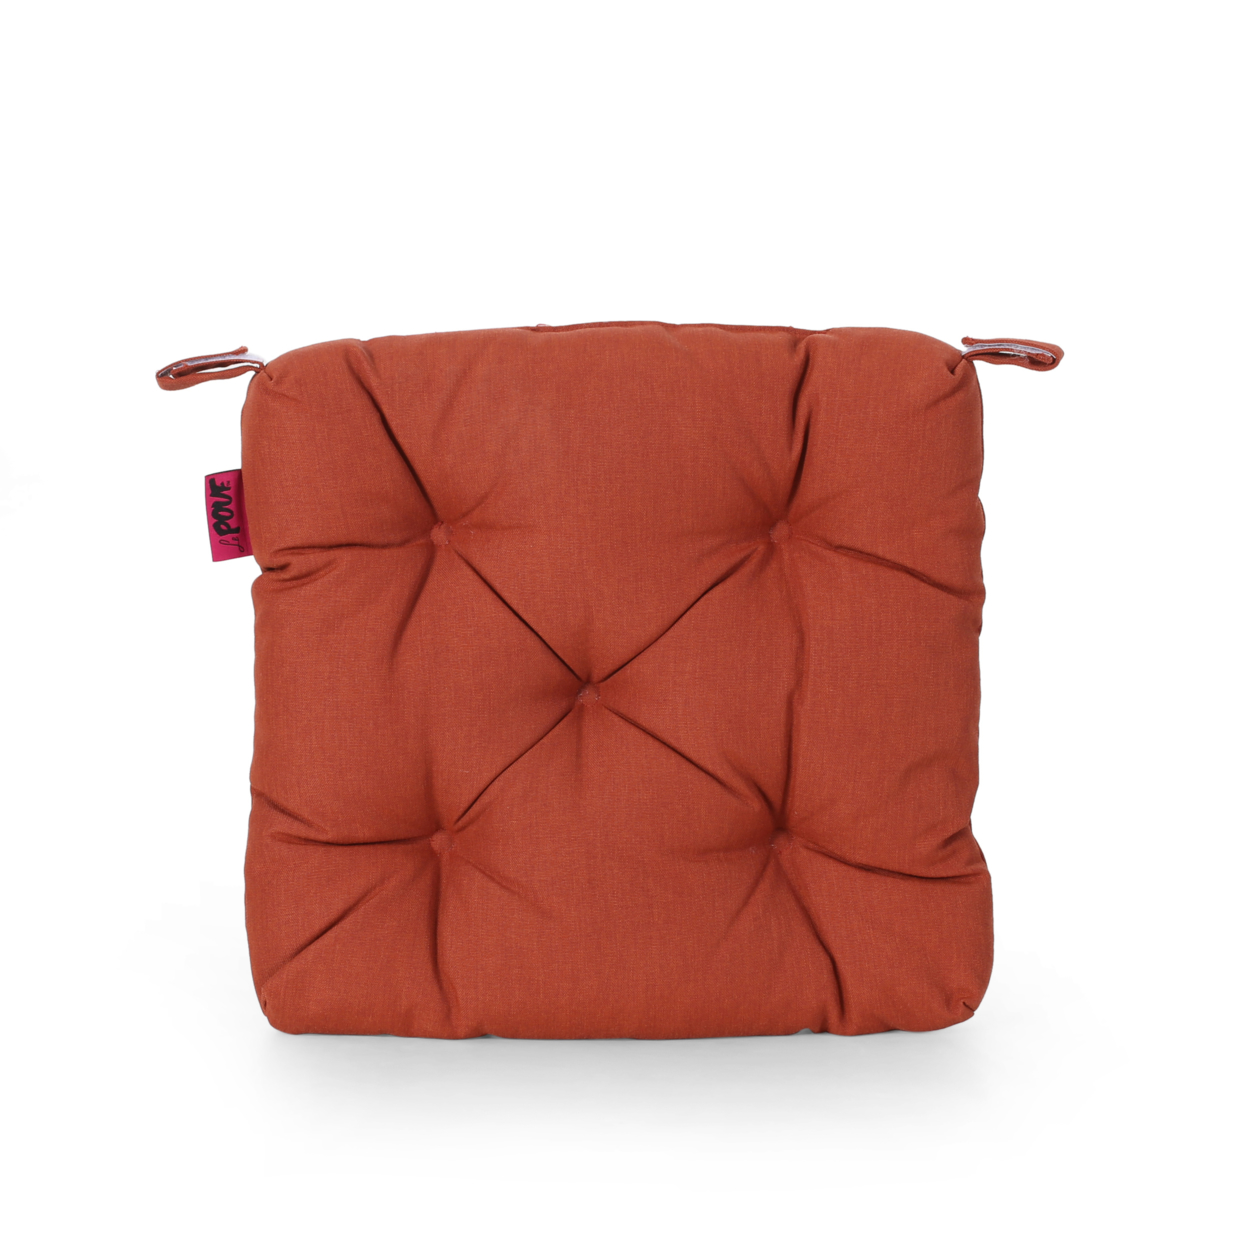 Theresa Indoor Fabric Classic Tufted Chair Cushion - Muted Orange